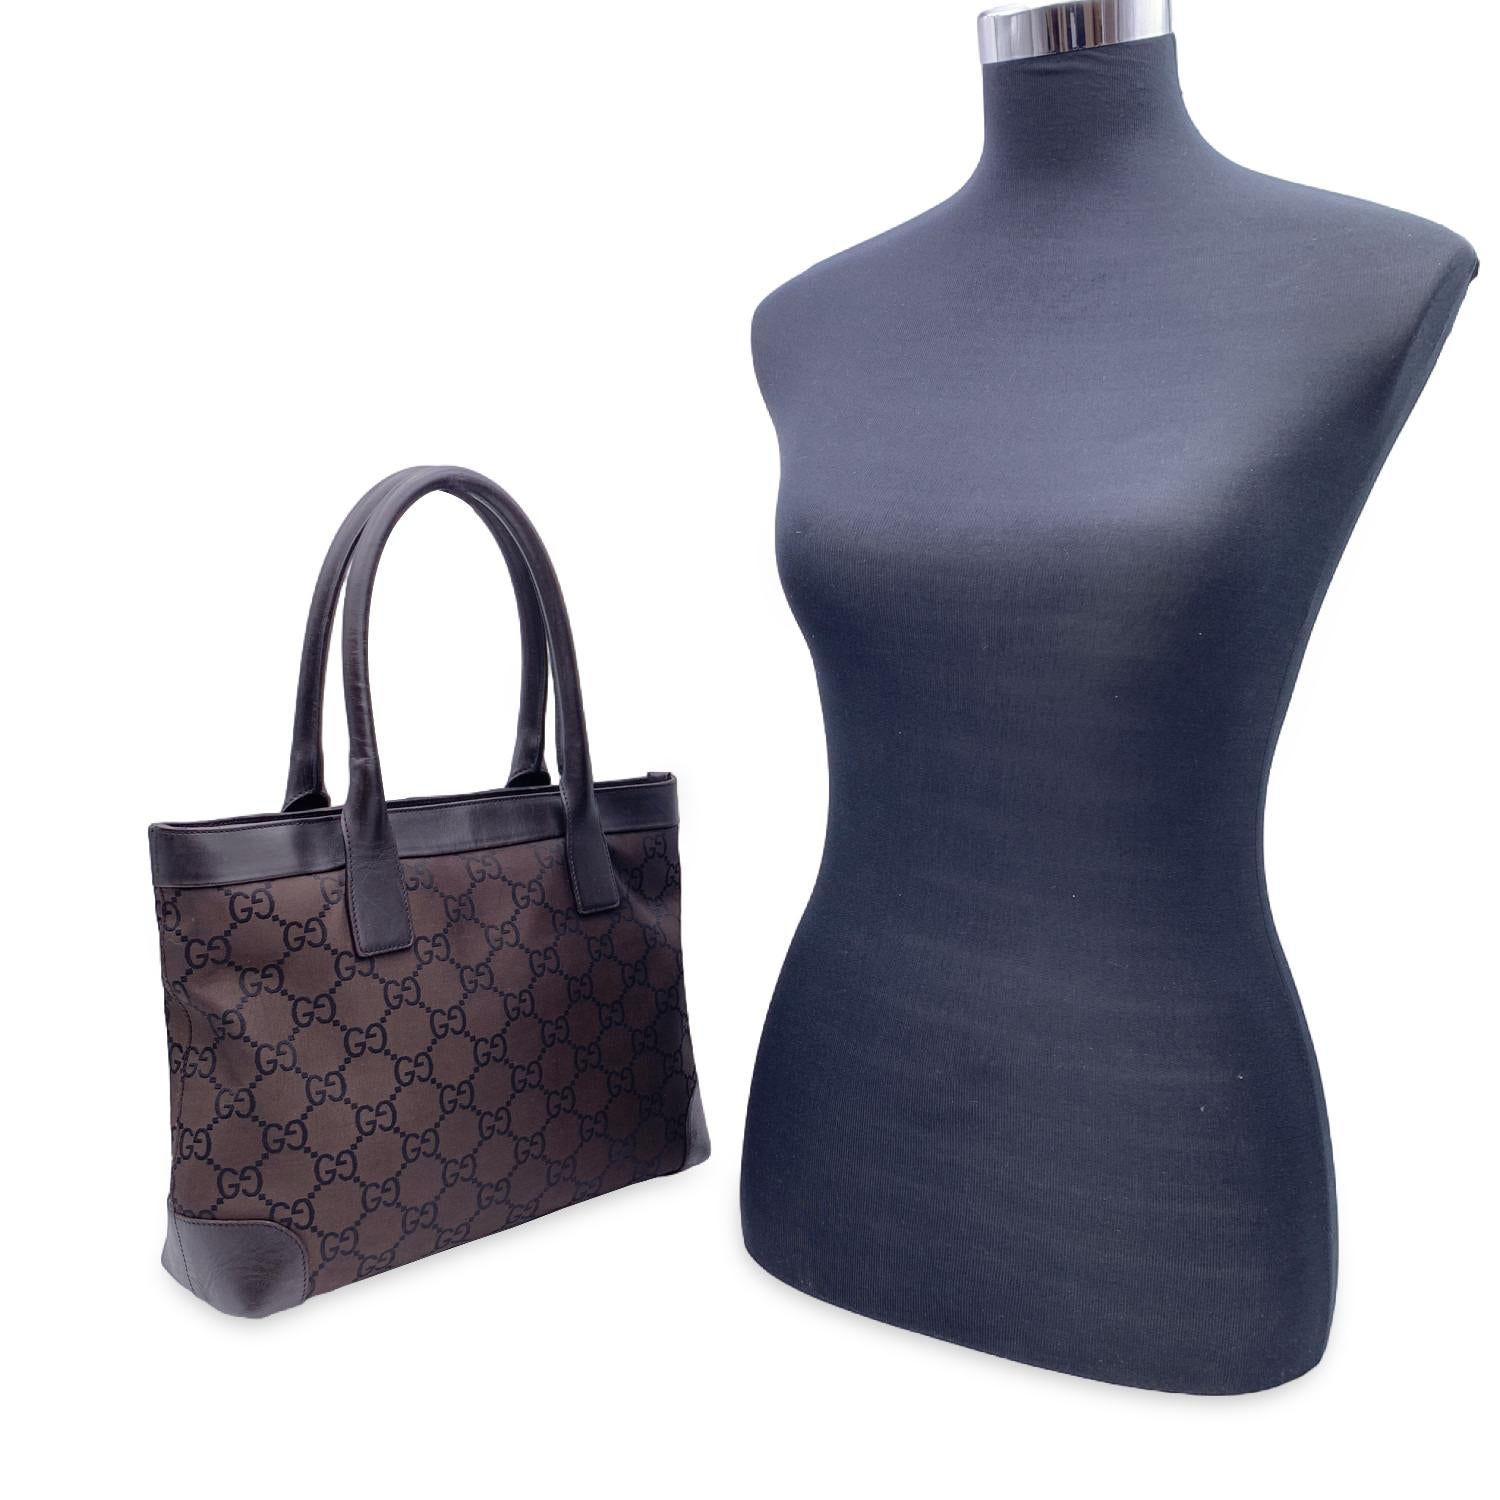 Beautiful Gucci monogram Tote bag, crafted in brown GG - GUCCI monogram canvas with brown leather trim and handles.Upper zipper closure. Fabric lining. 1 side zip pocket. 'GUCCI - made in italy' tag inside (with serial number on its